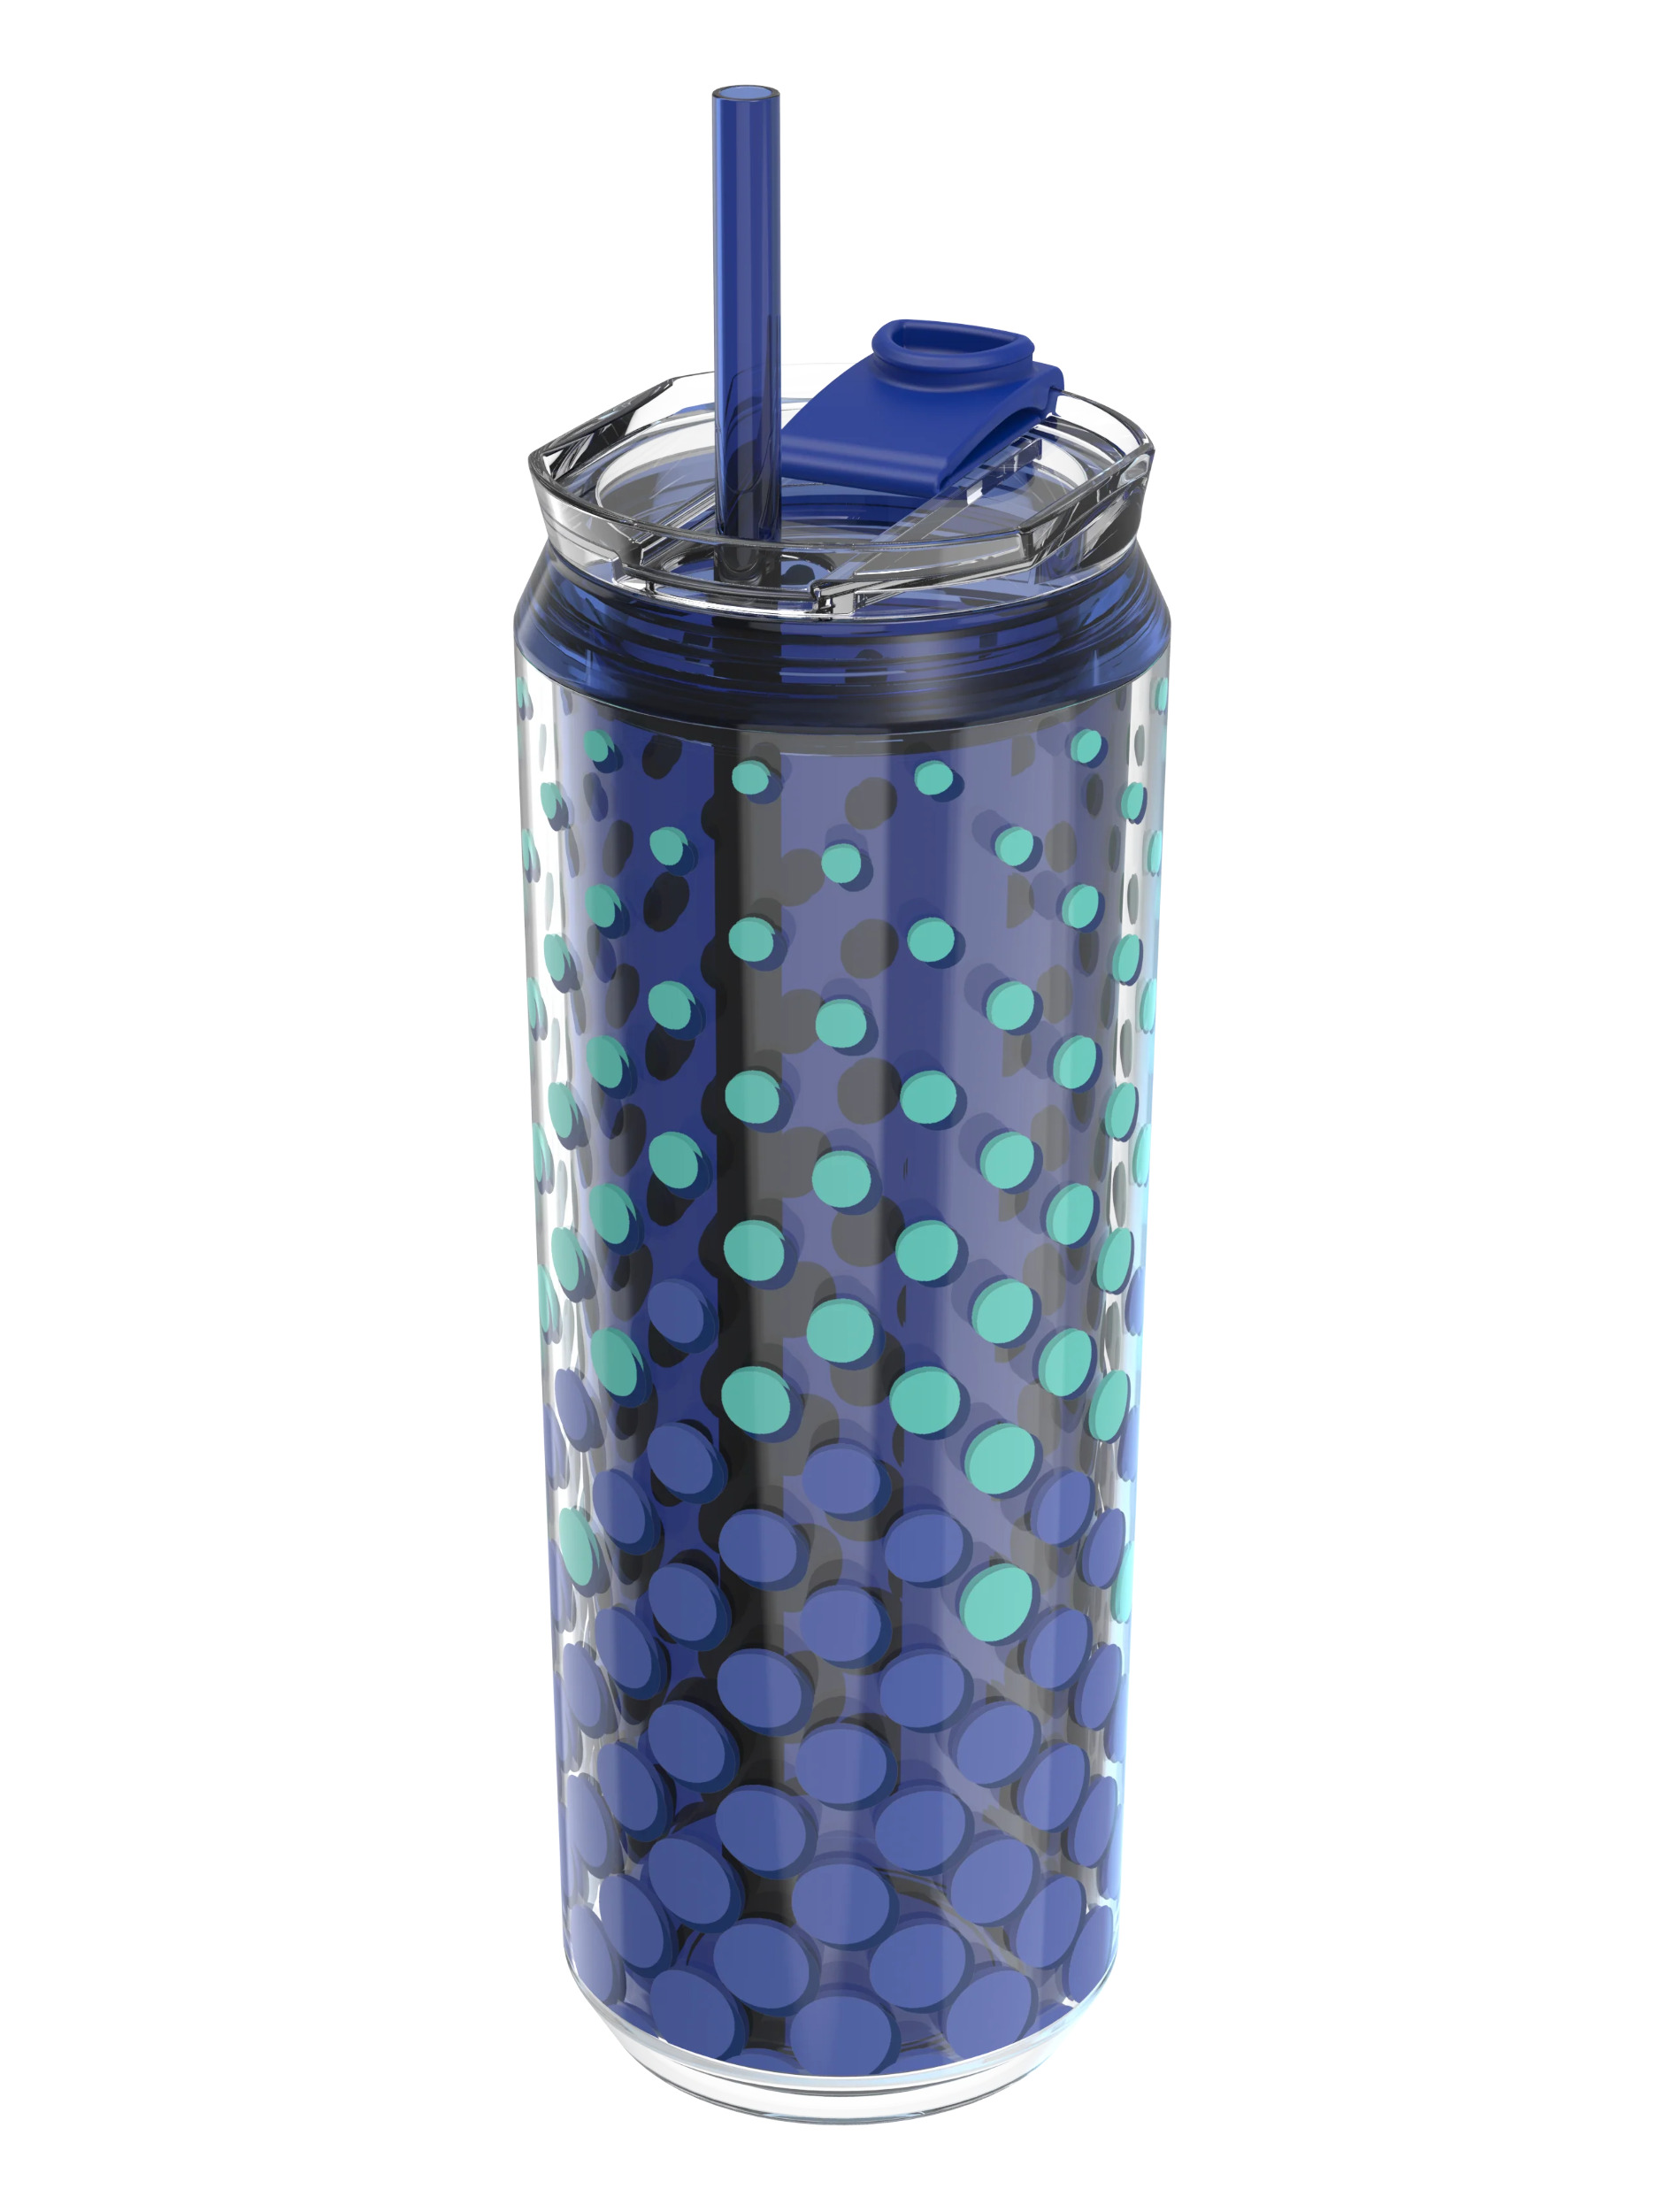 Cool Gear 3-Pack Modern Tumbler with Reusable Straw | Dishwasher Safe, Cup Holder Friendly, Spillproof, Double-Wall Insulated Travel Tumbler | Printed Variety Pack - image 2 of 4